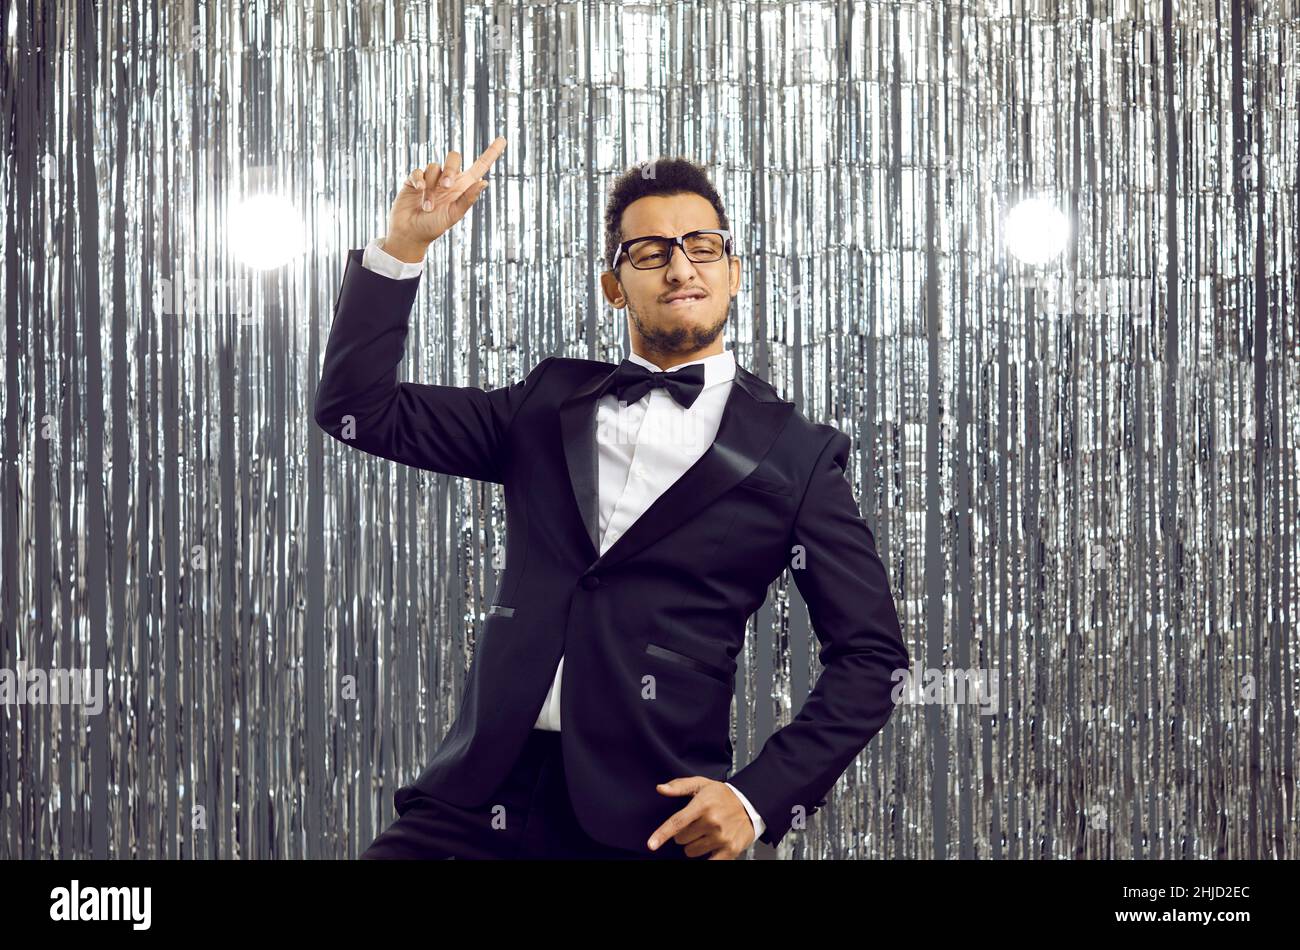 Happy funny young man in an elegant suit and bowtie dancing and having fun at a party Stock Photo